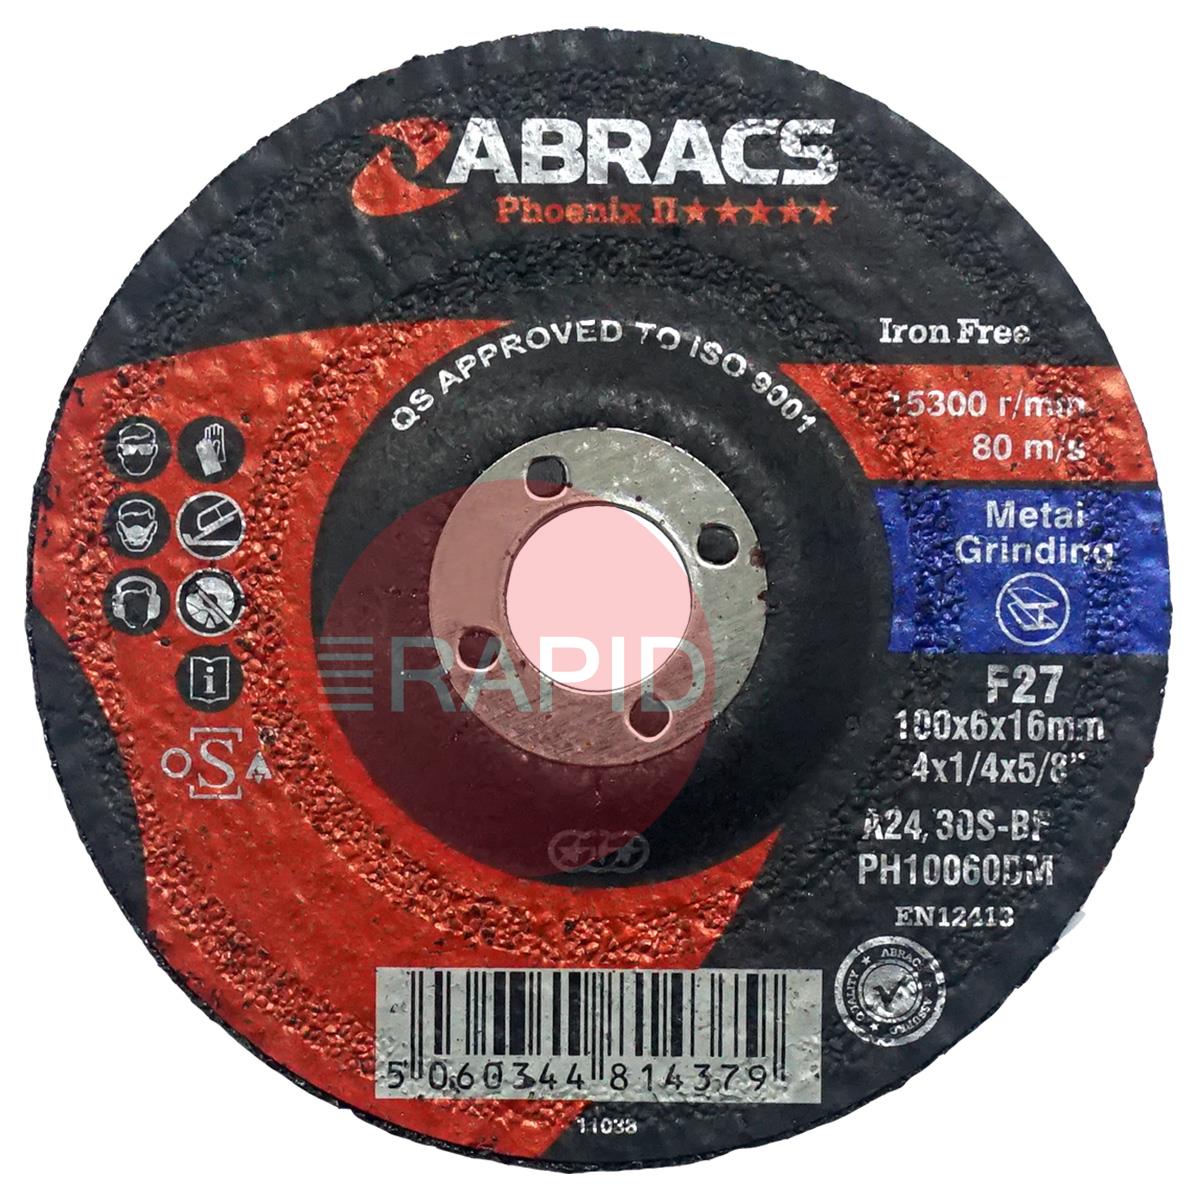 4MG  Abracs Phoenix II 100mm (4) Depressed Centre Grinding Disc 6mm Thick. Grade A24/30S4BF For Steel.